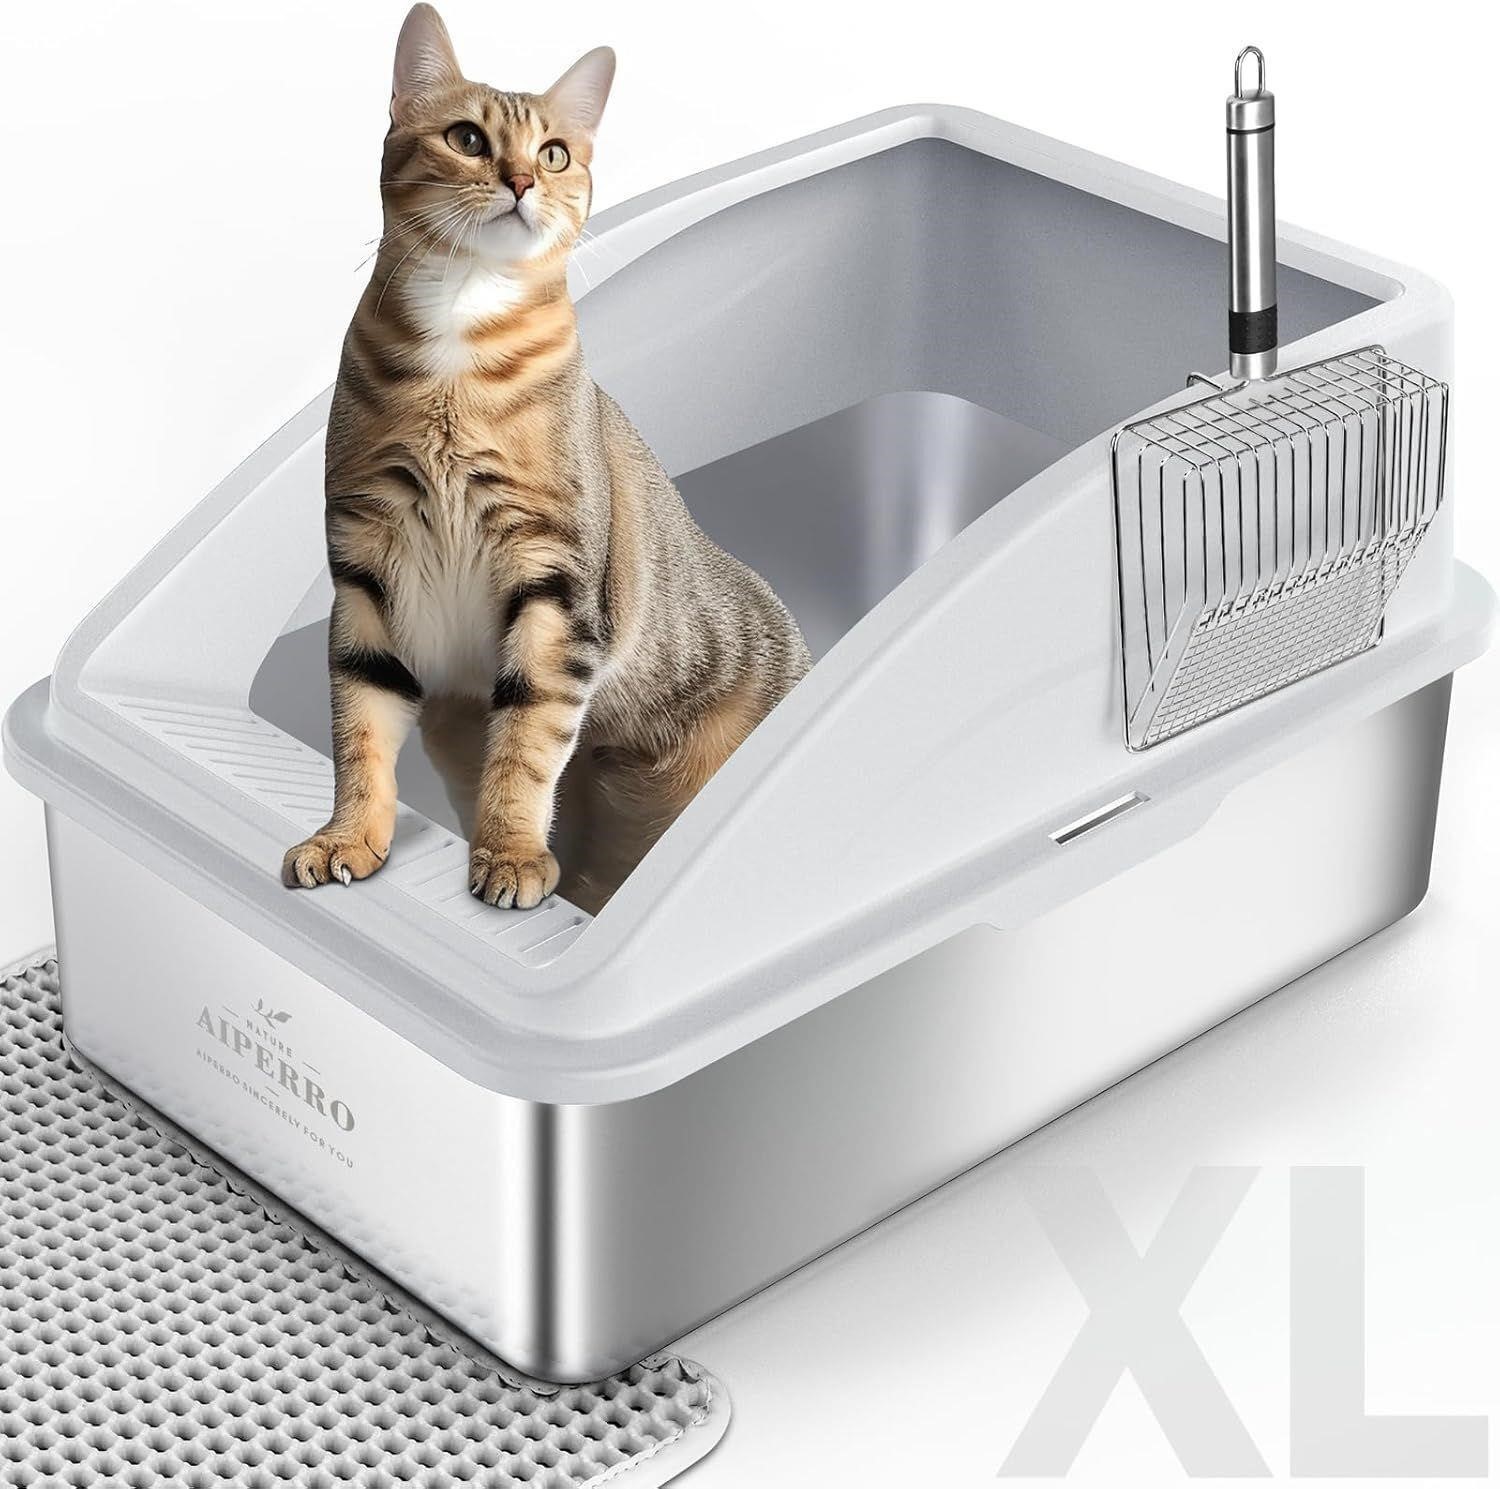 Enclosed Stainless Steel Cat Litter Box